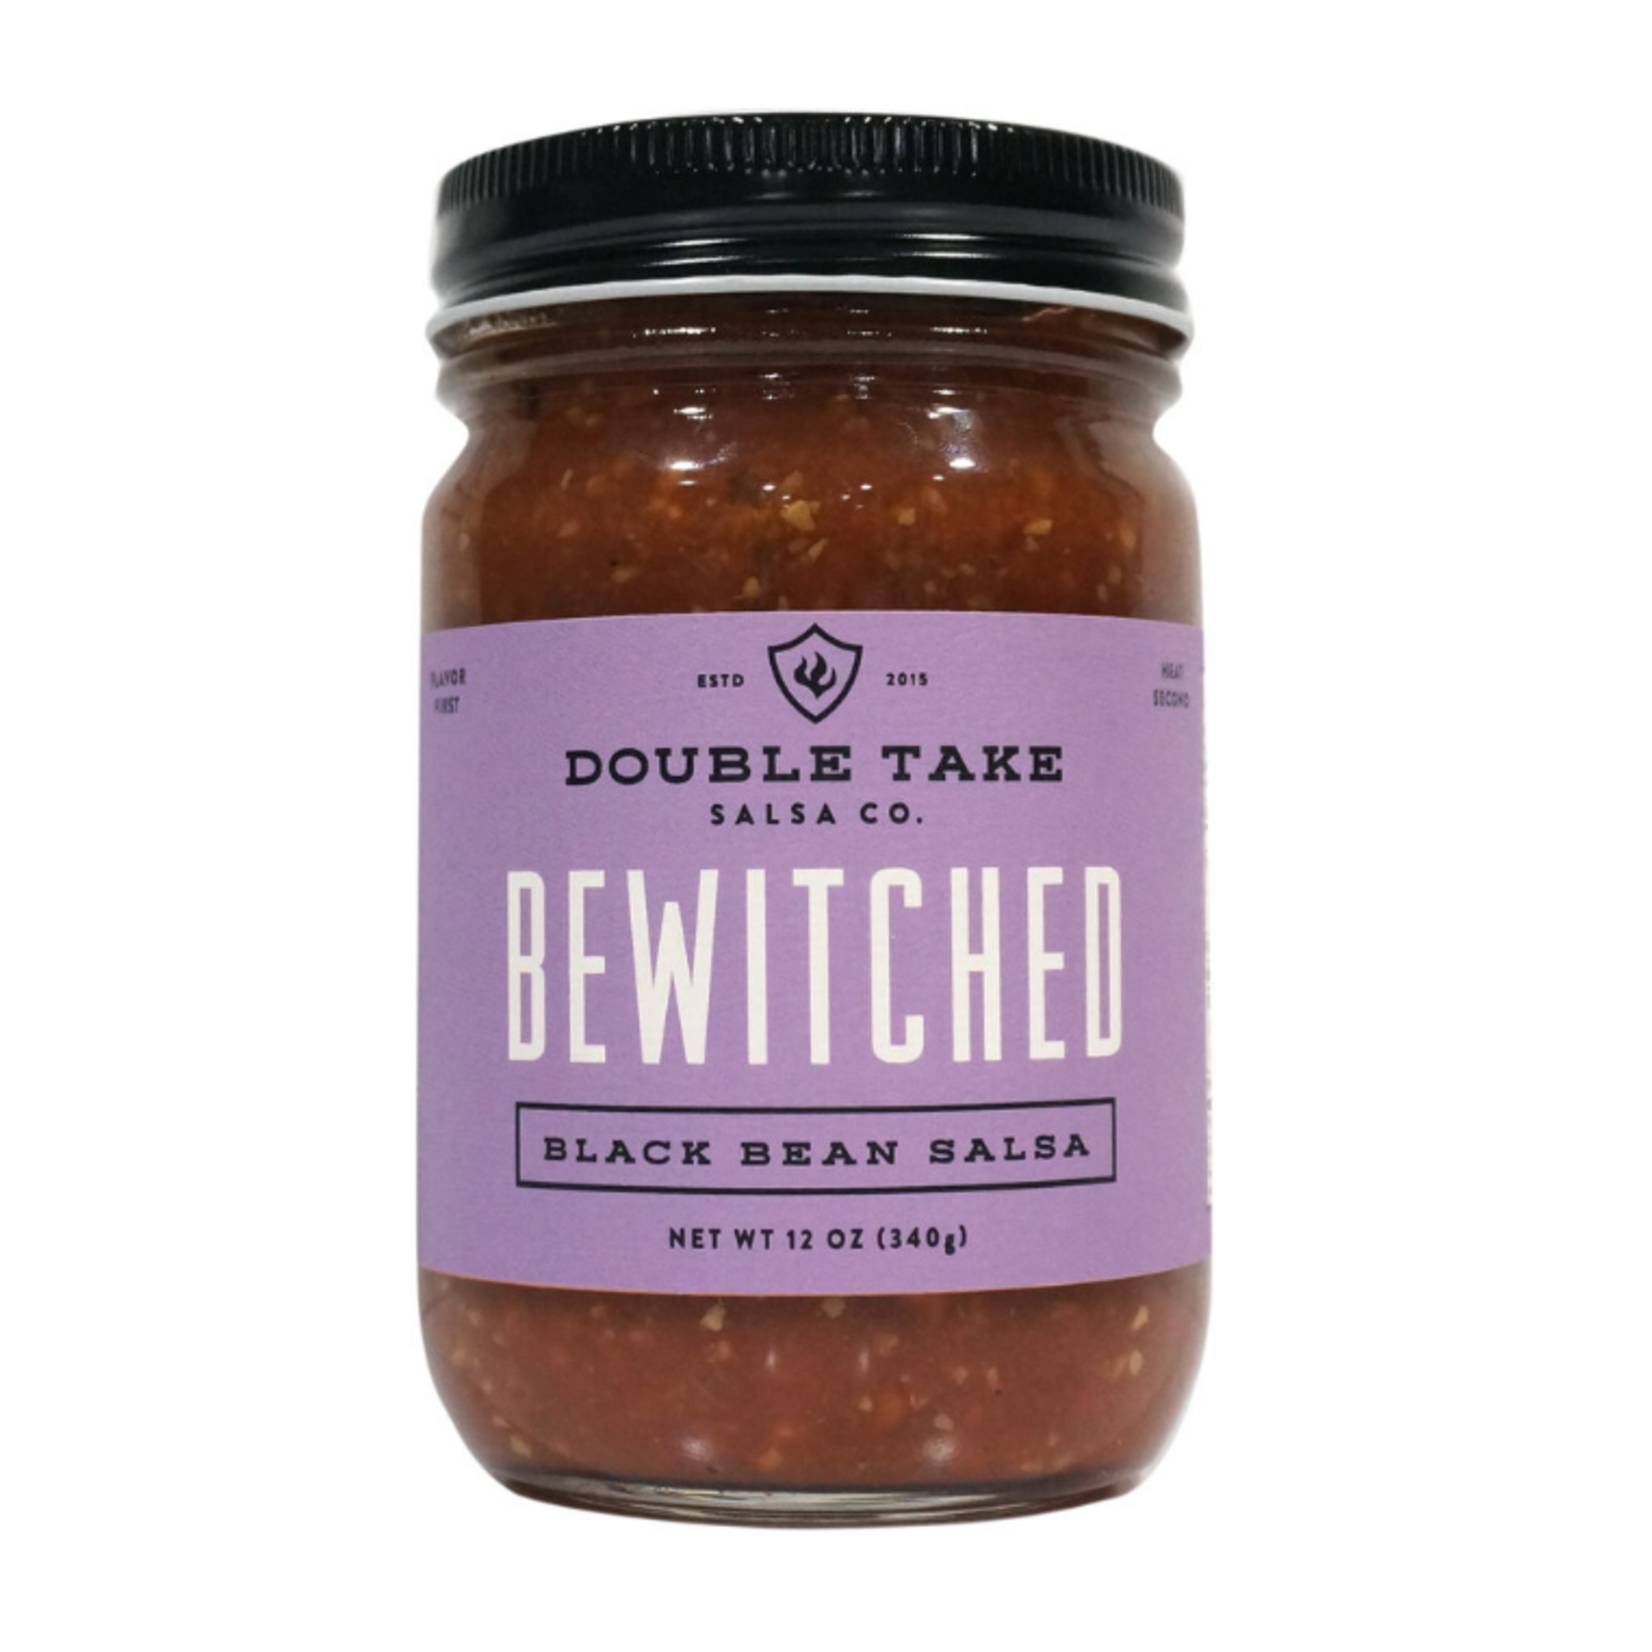 Double Take Salsa Bewitched Black Bean Salsa